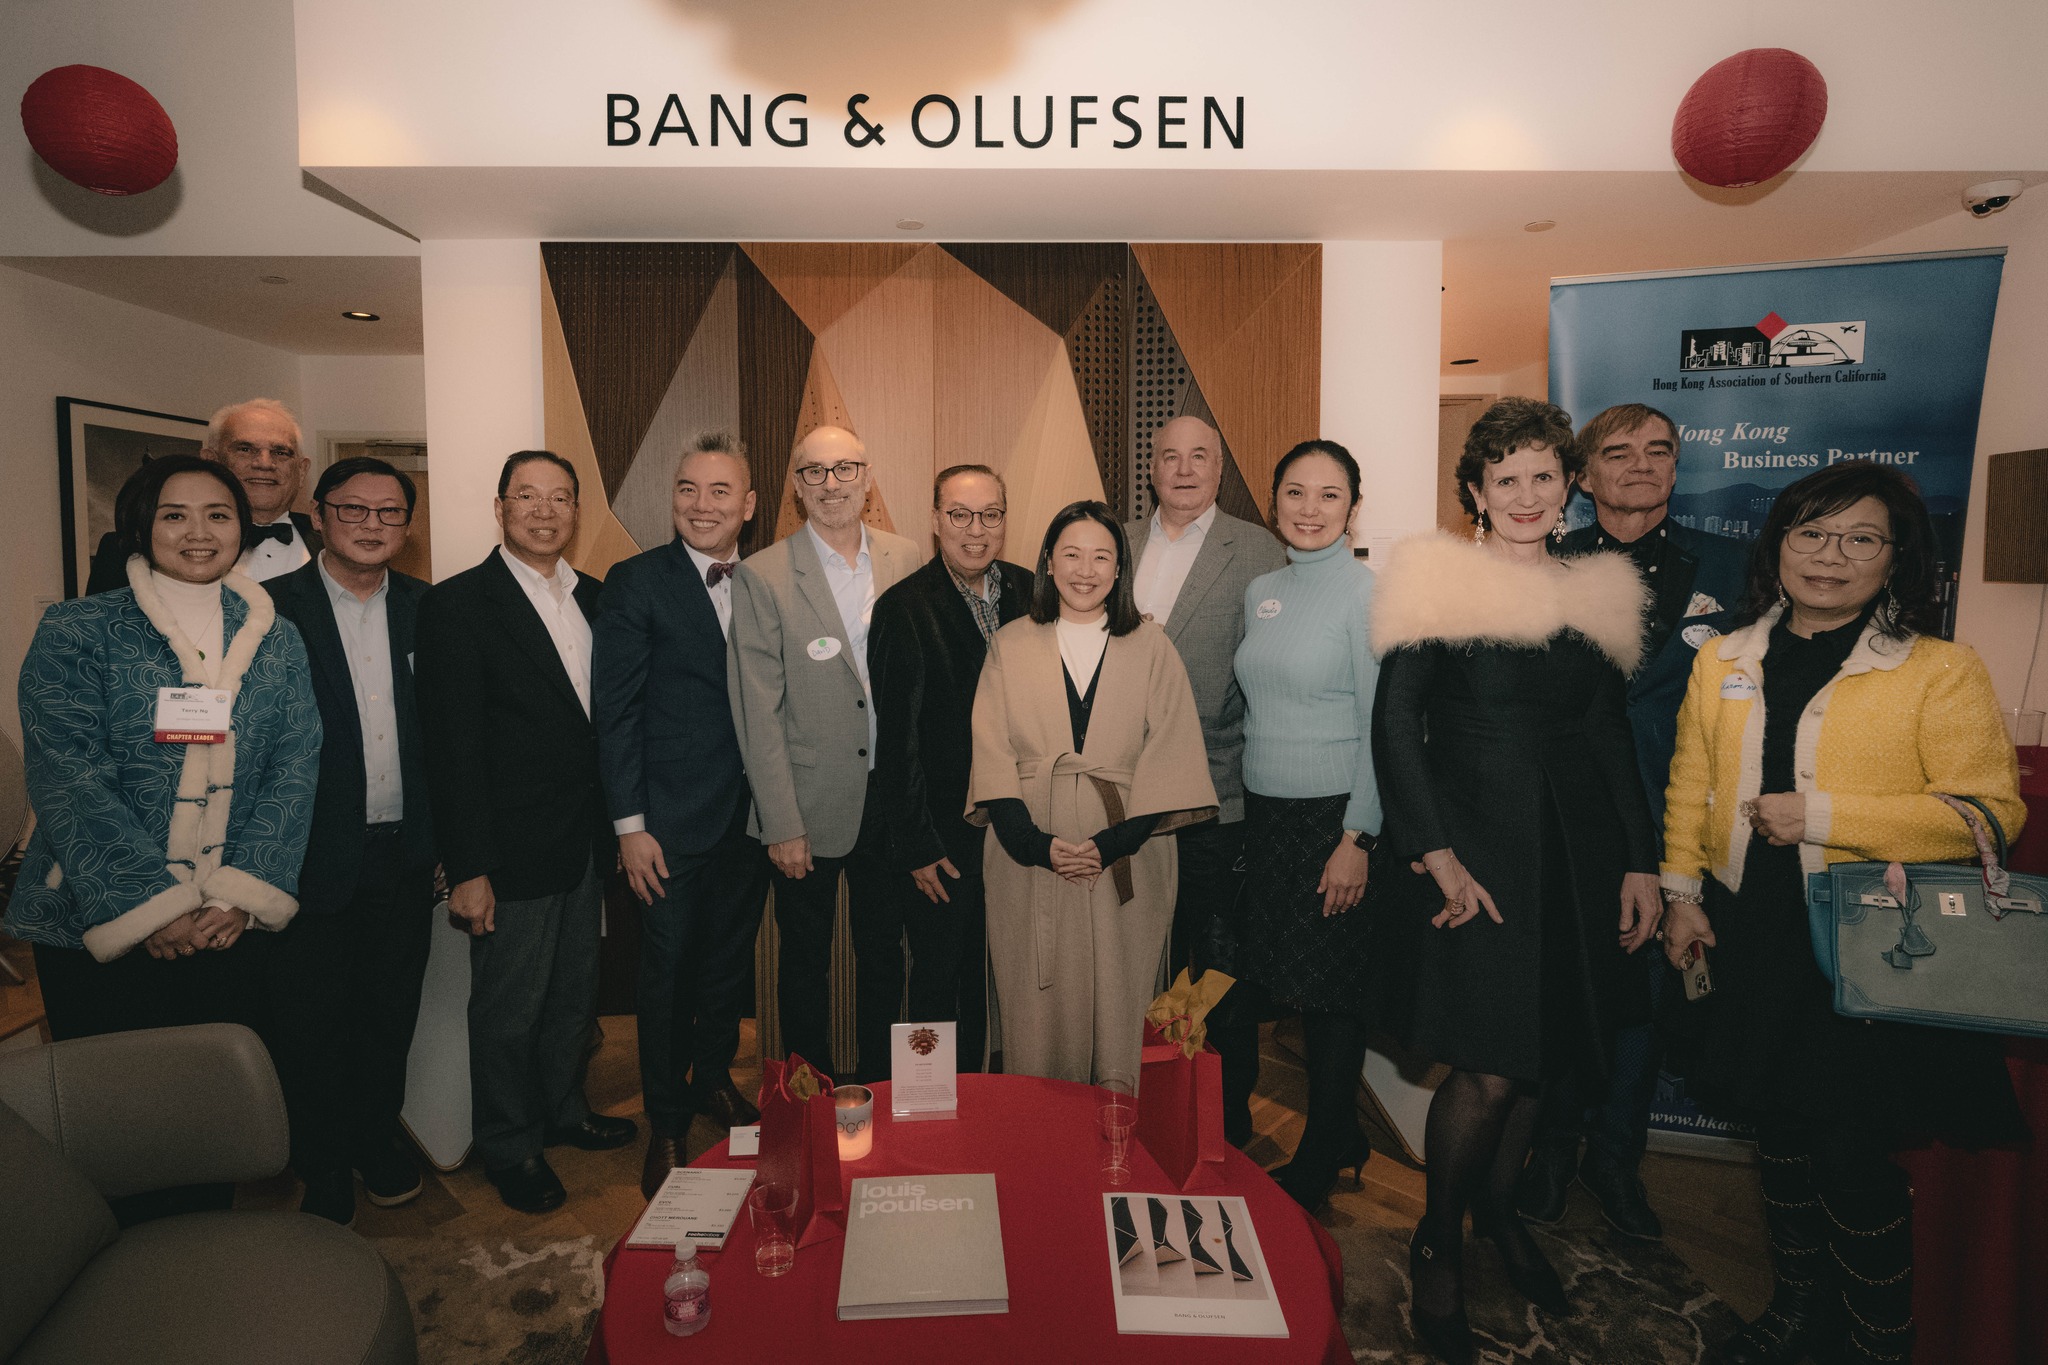 January 12, 2023 – Bang & Olufsen Lunar New Year Party